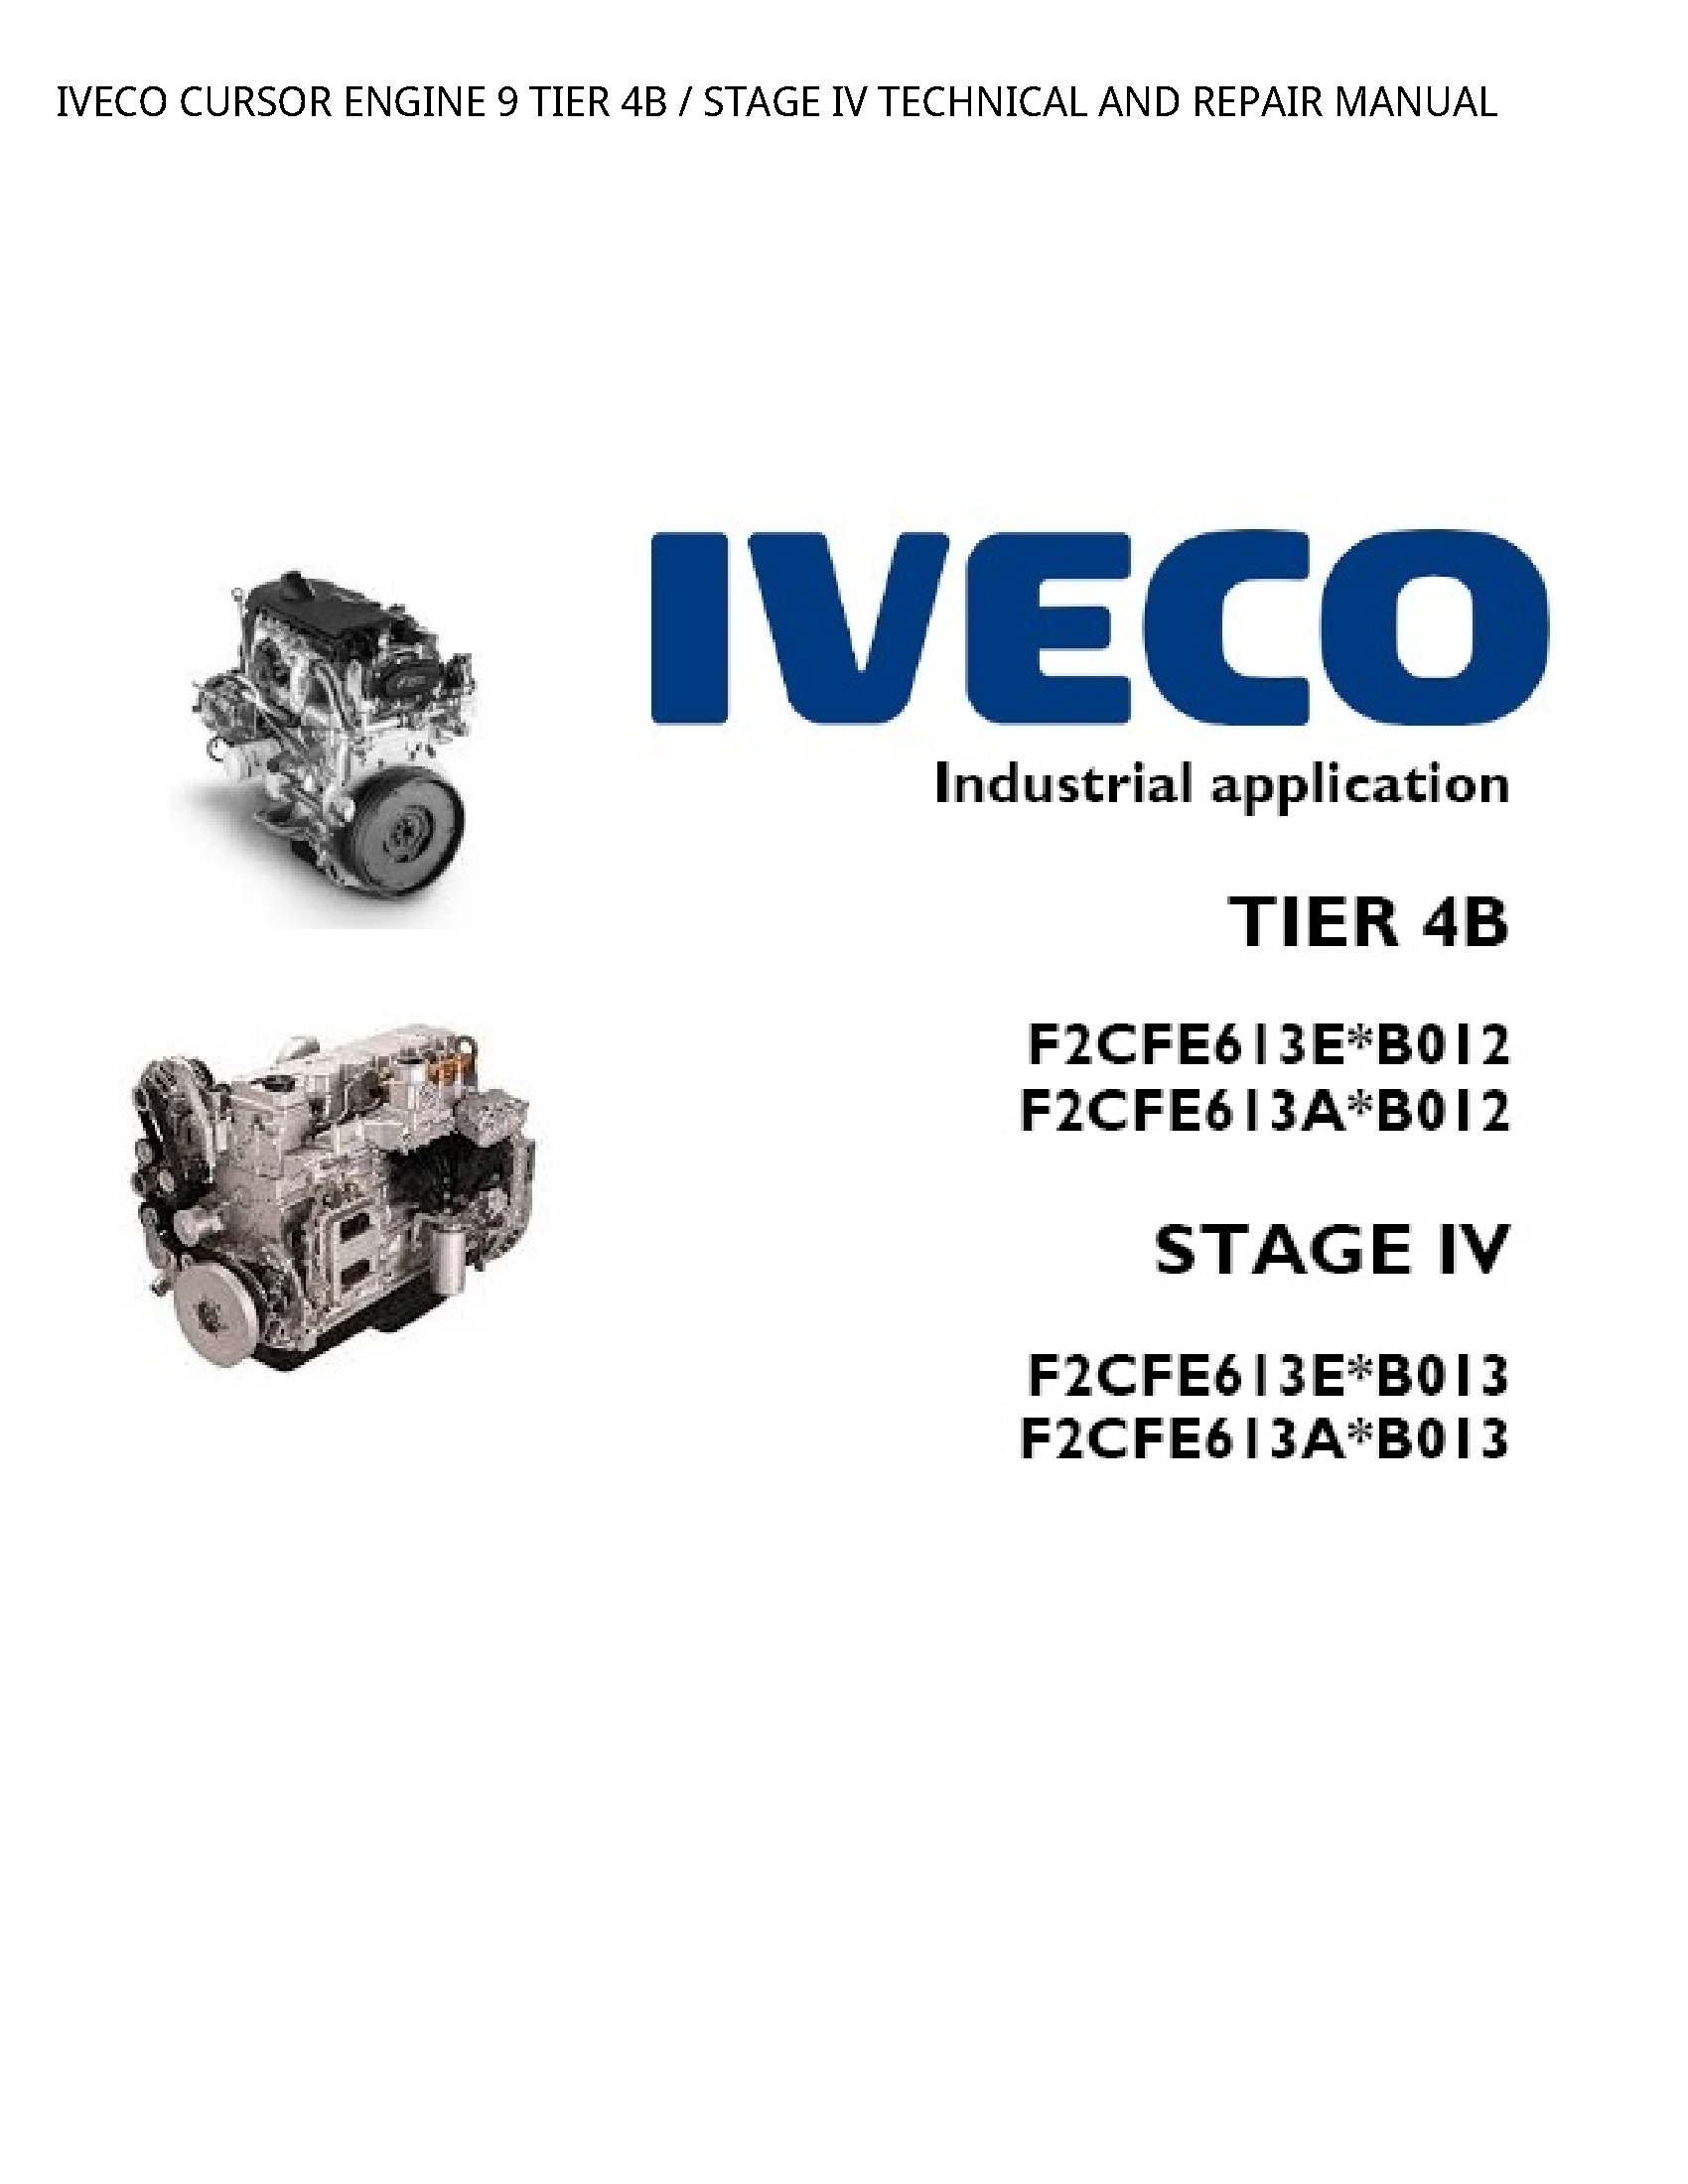 Iveco 9 CURSOR ENGINE TIER STAGE IV TECHNICAL AND REPAIR manual